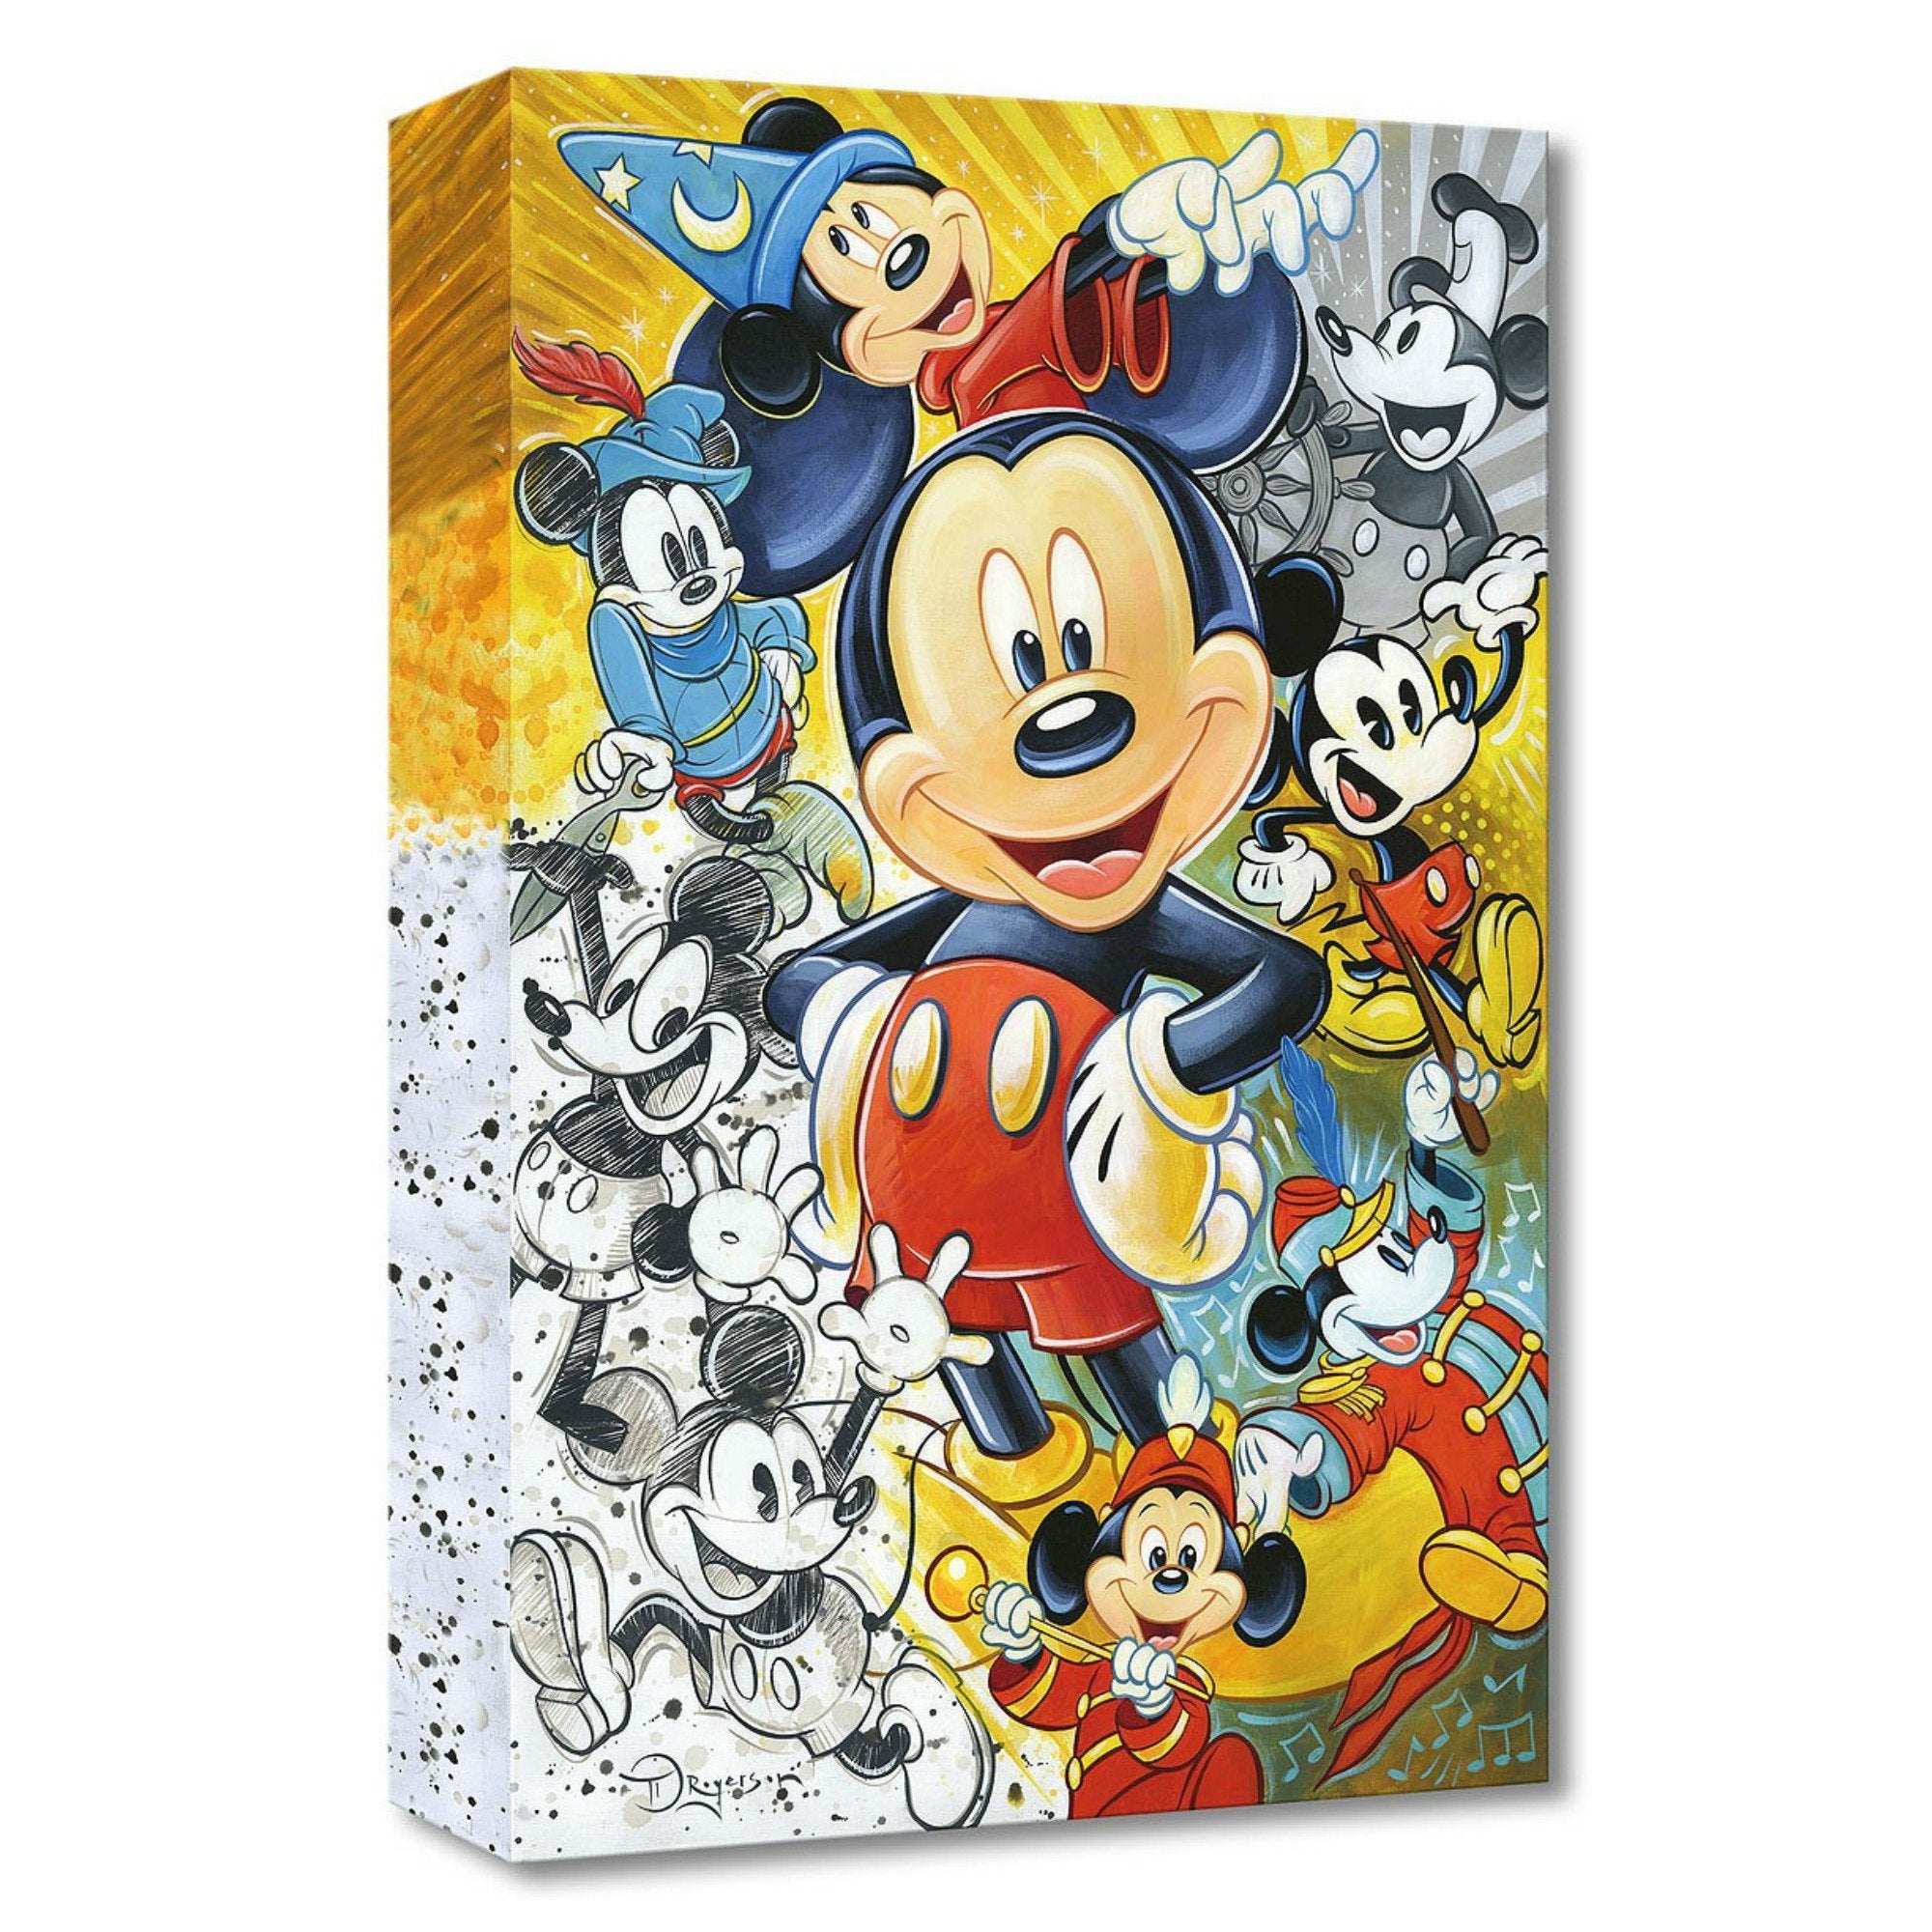  90 Years of Mickey Mouse by Tim Rogerson A special tribute to Mickey Mouse, a colorful collage Celebrating 90 Historic Years! 